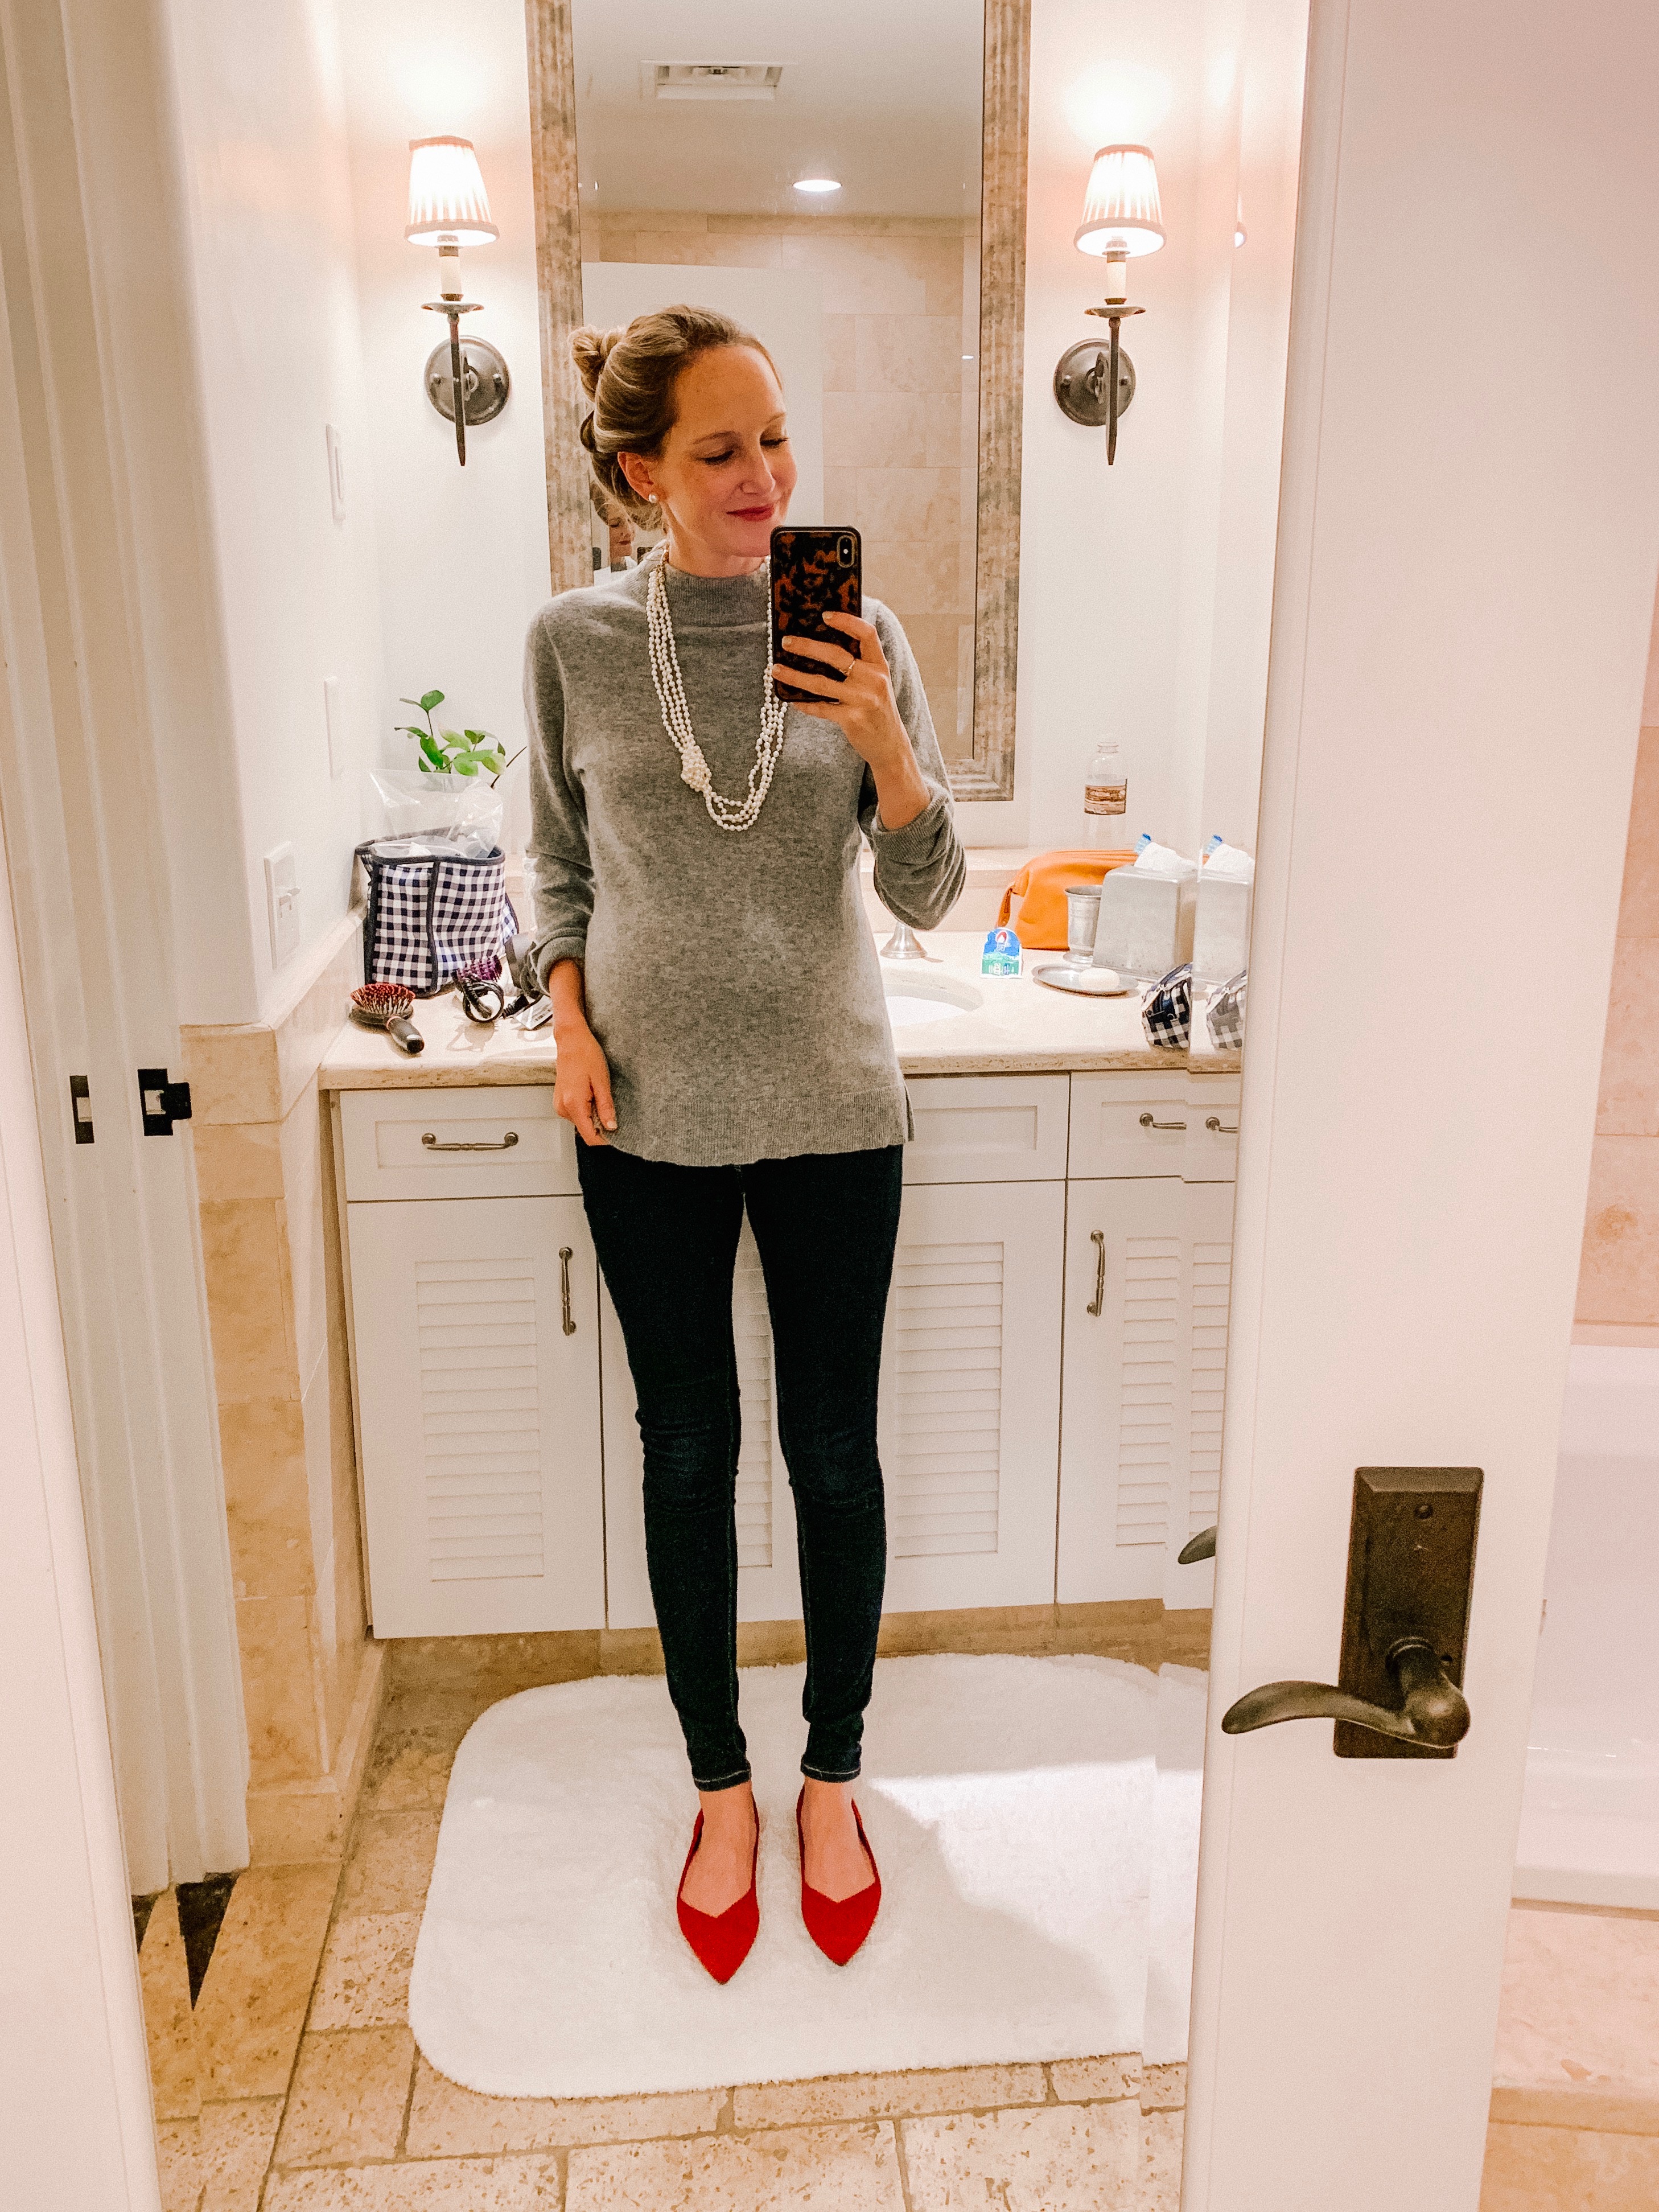 Gray sweater, black leggings and red flats